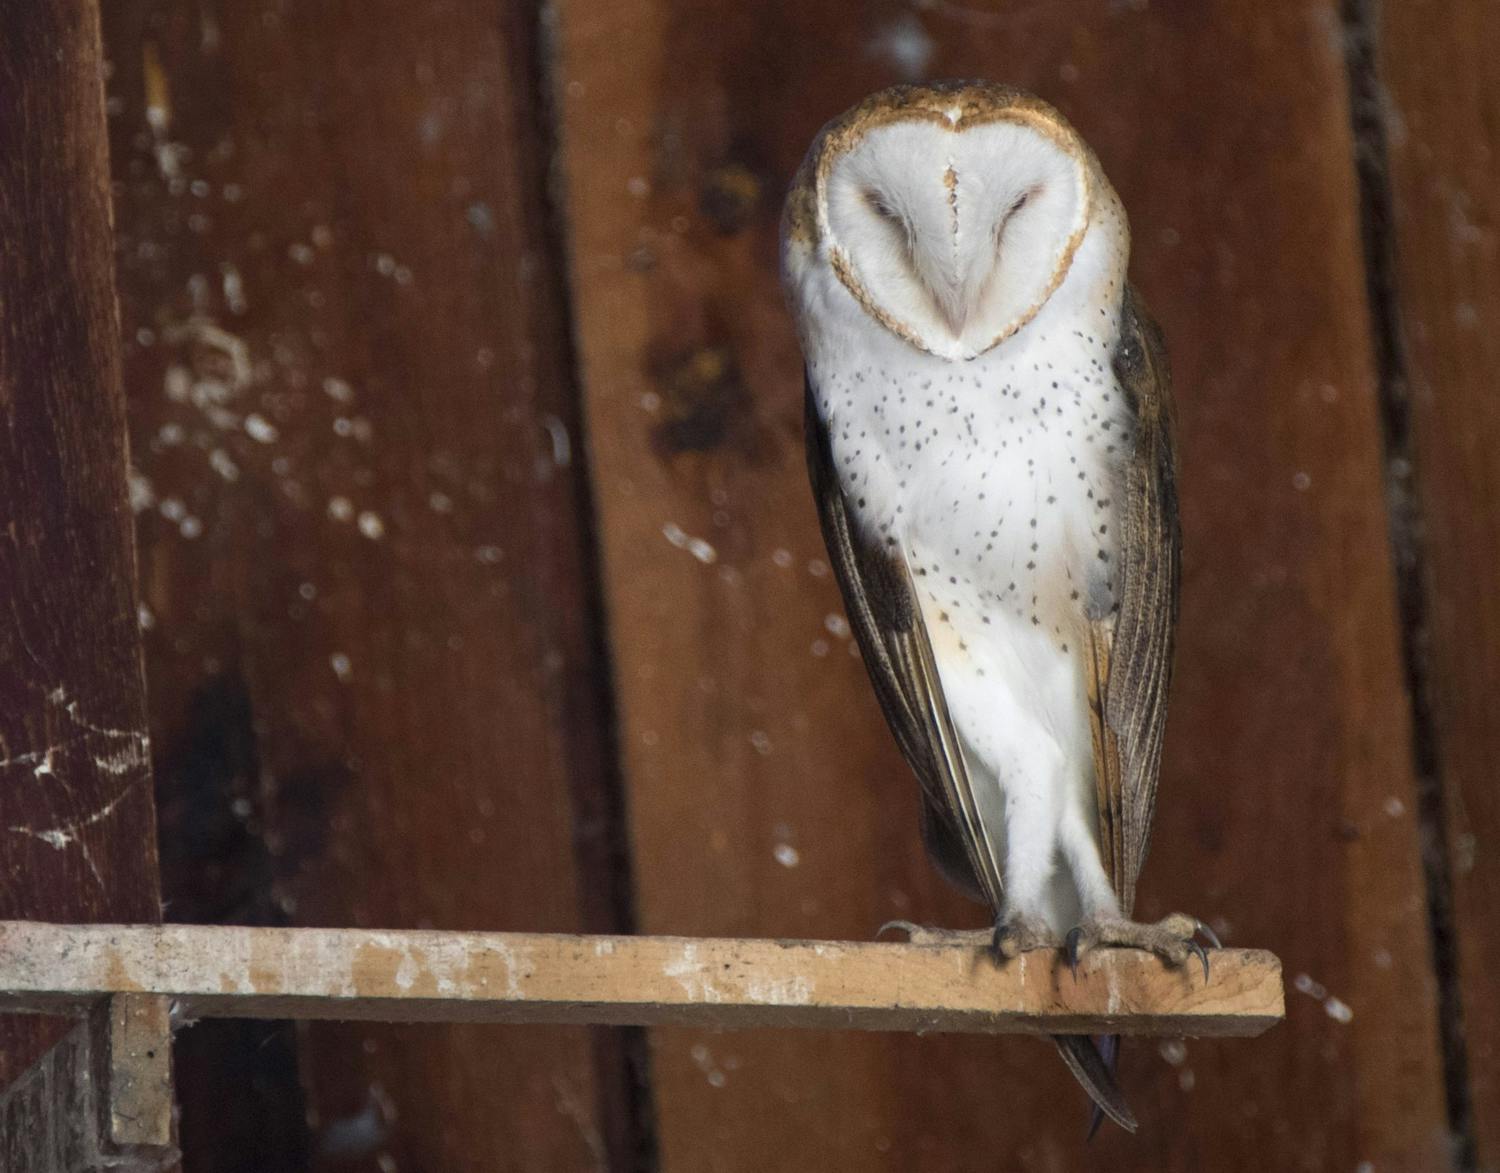 Farming: I don't know if we have one barn owl or a family...